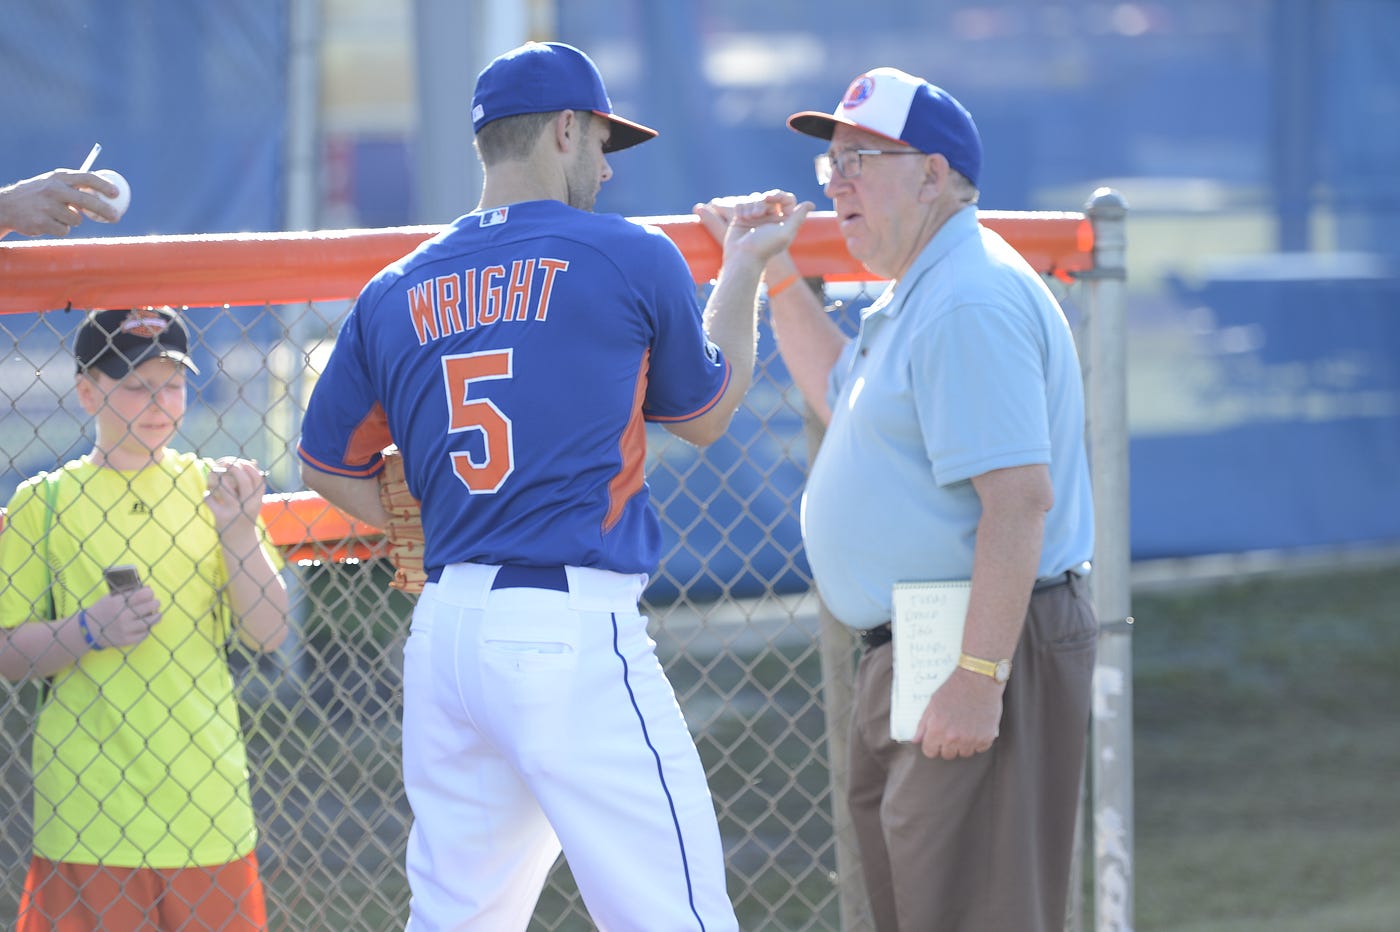 The Mets Got Mr. Wright. By Jay Horwitz, by New York Mets